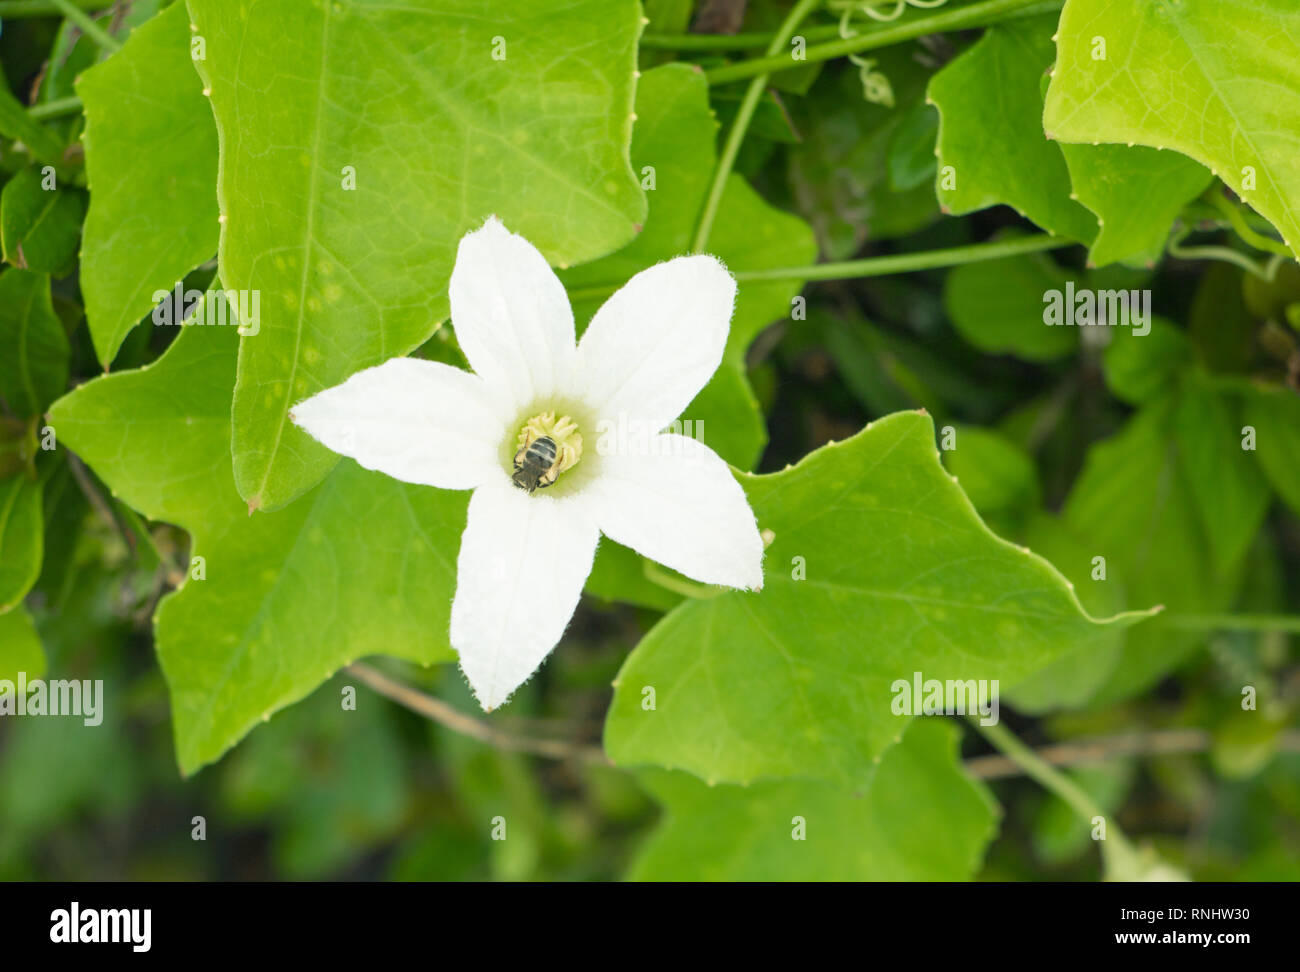 flower ivy gourd white and leaf green ( Scientific name coccinia grandis ) Stock Photo